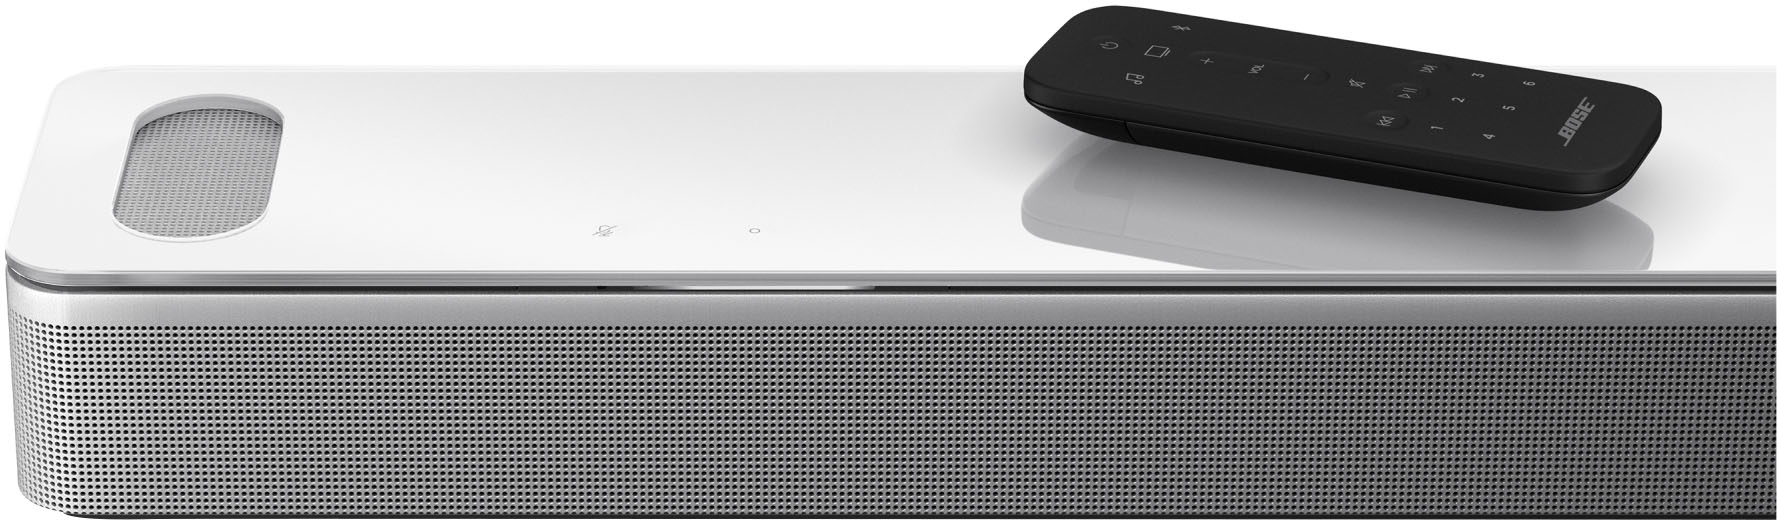 Atmos with Smart Voice and Arctic - Best Bose White Dolby Buy Soundbar Ultra Assistant 882963-1200